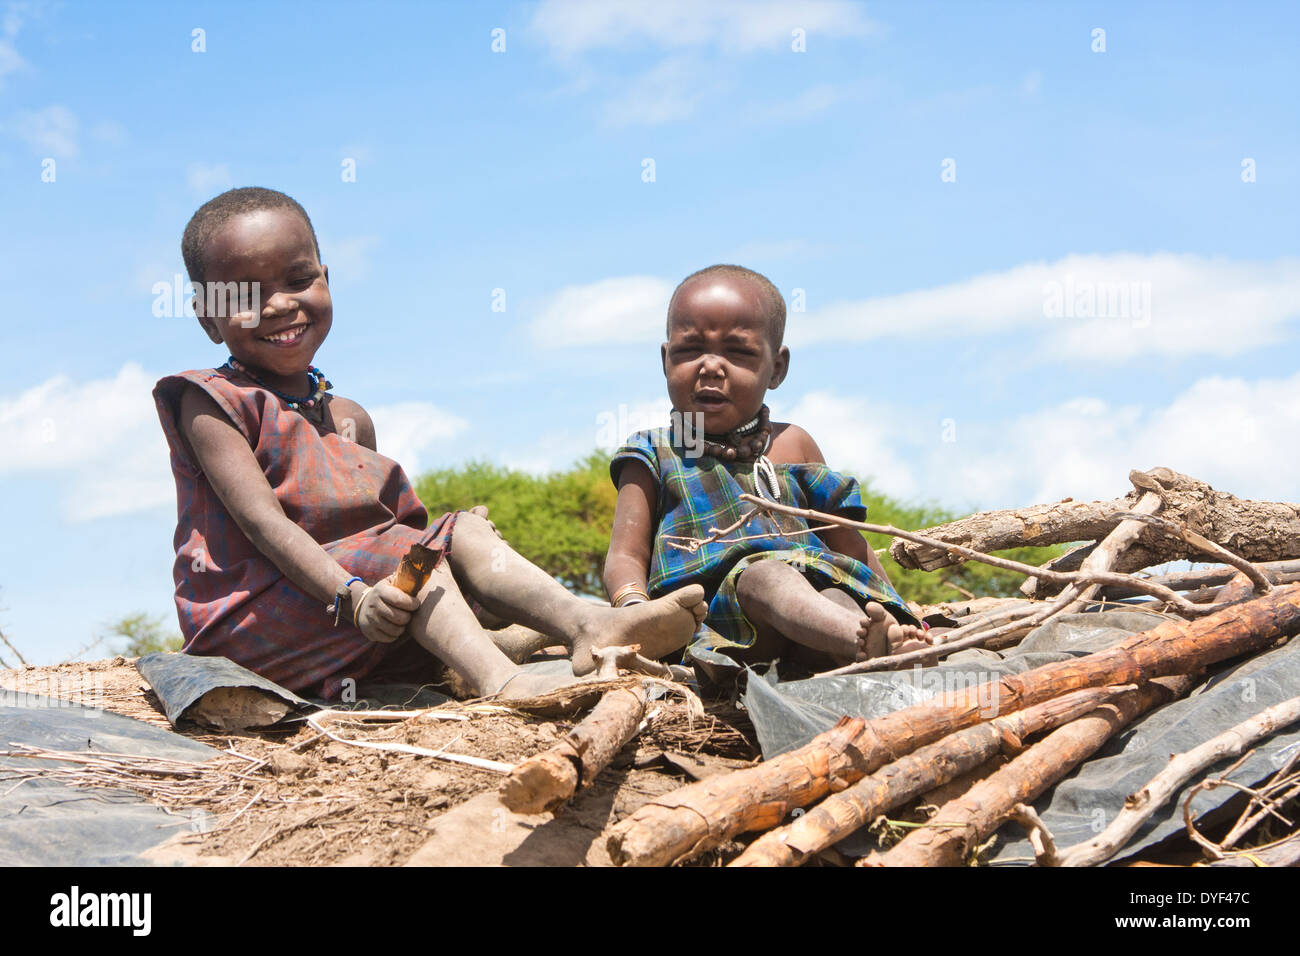 2 Maasai children on the roof of a hut. Photographed in Kenya Stock Photo